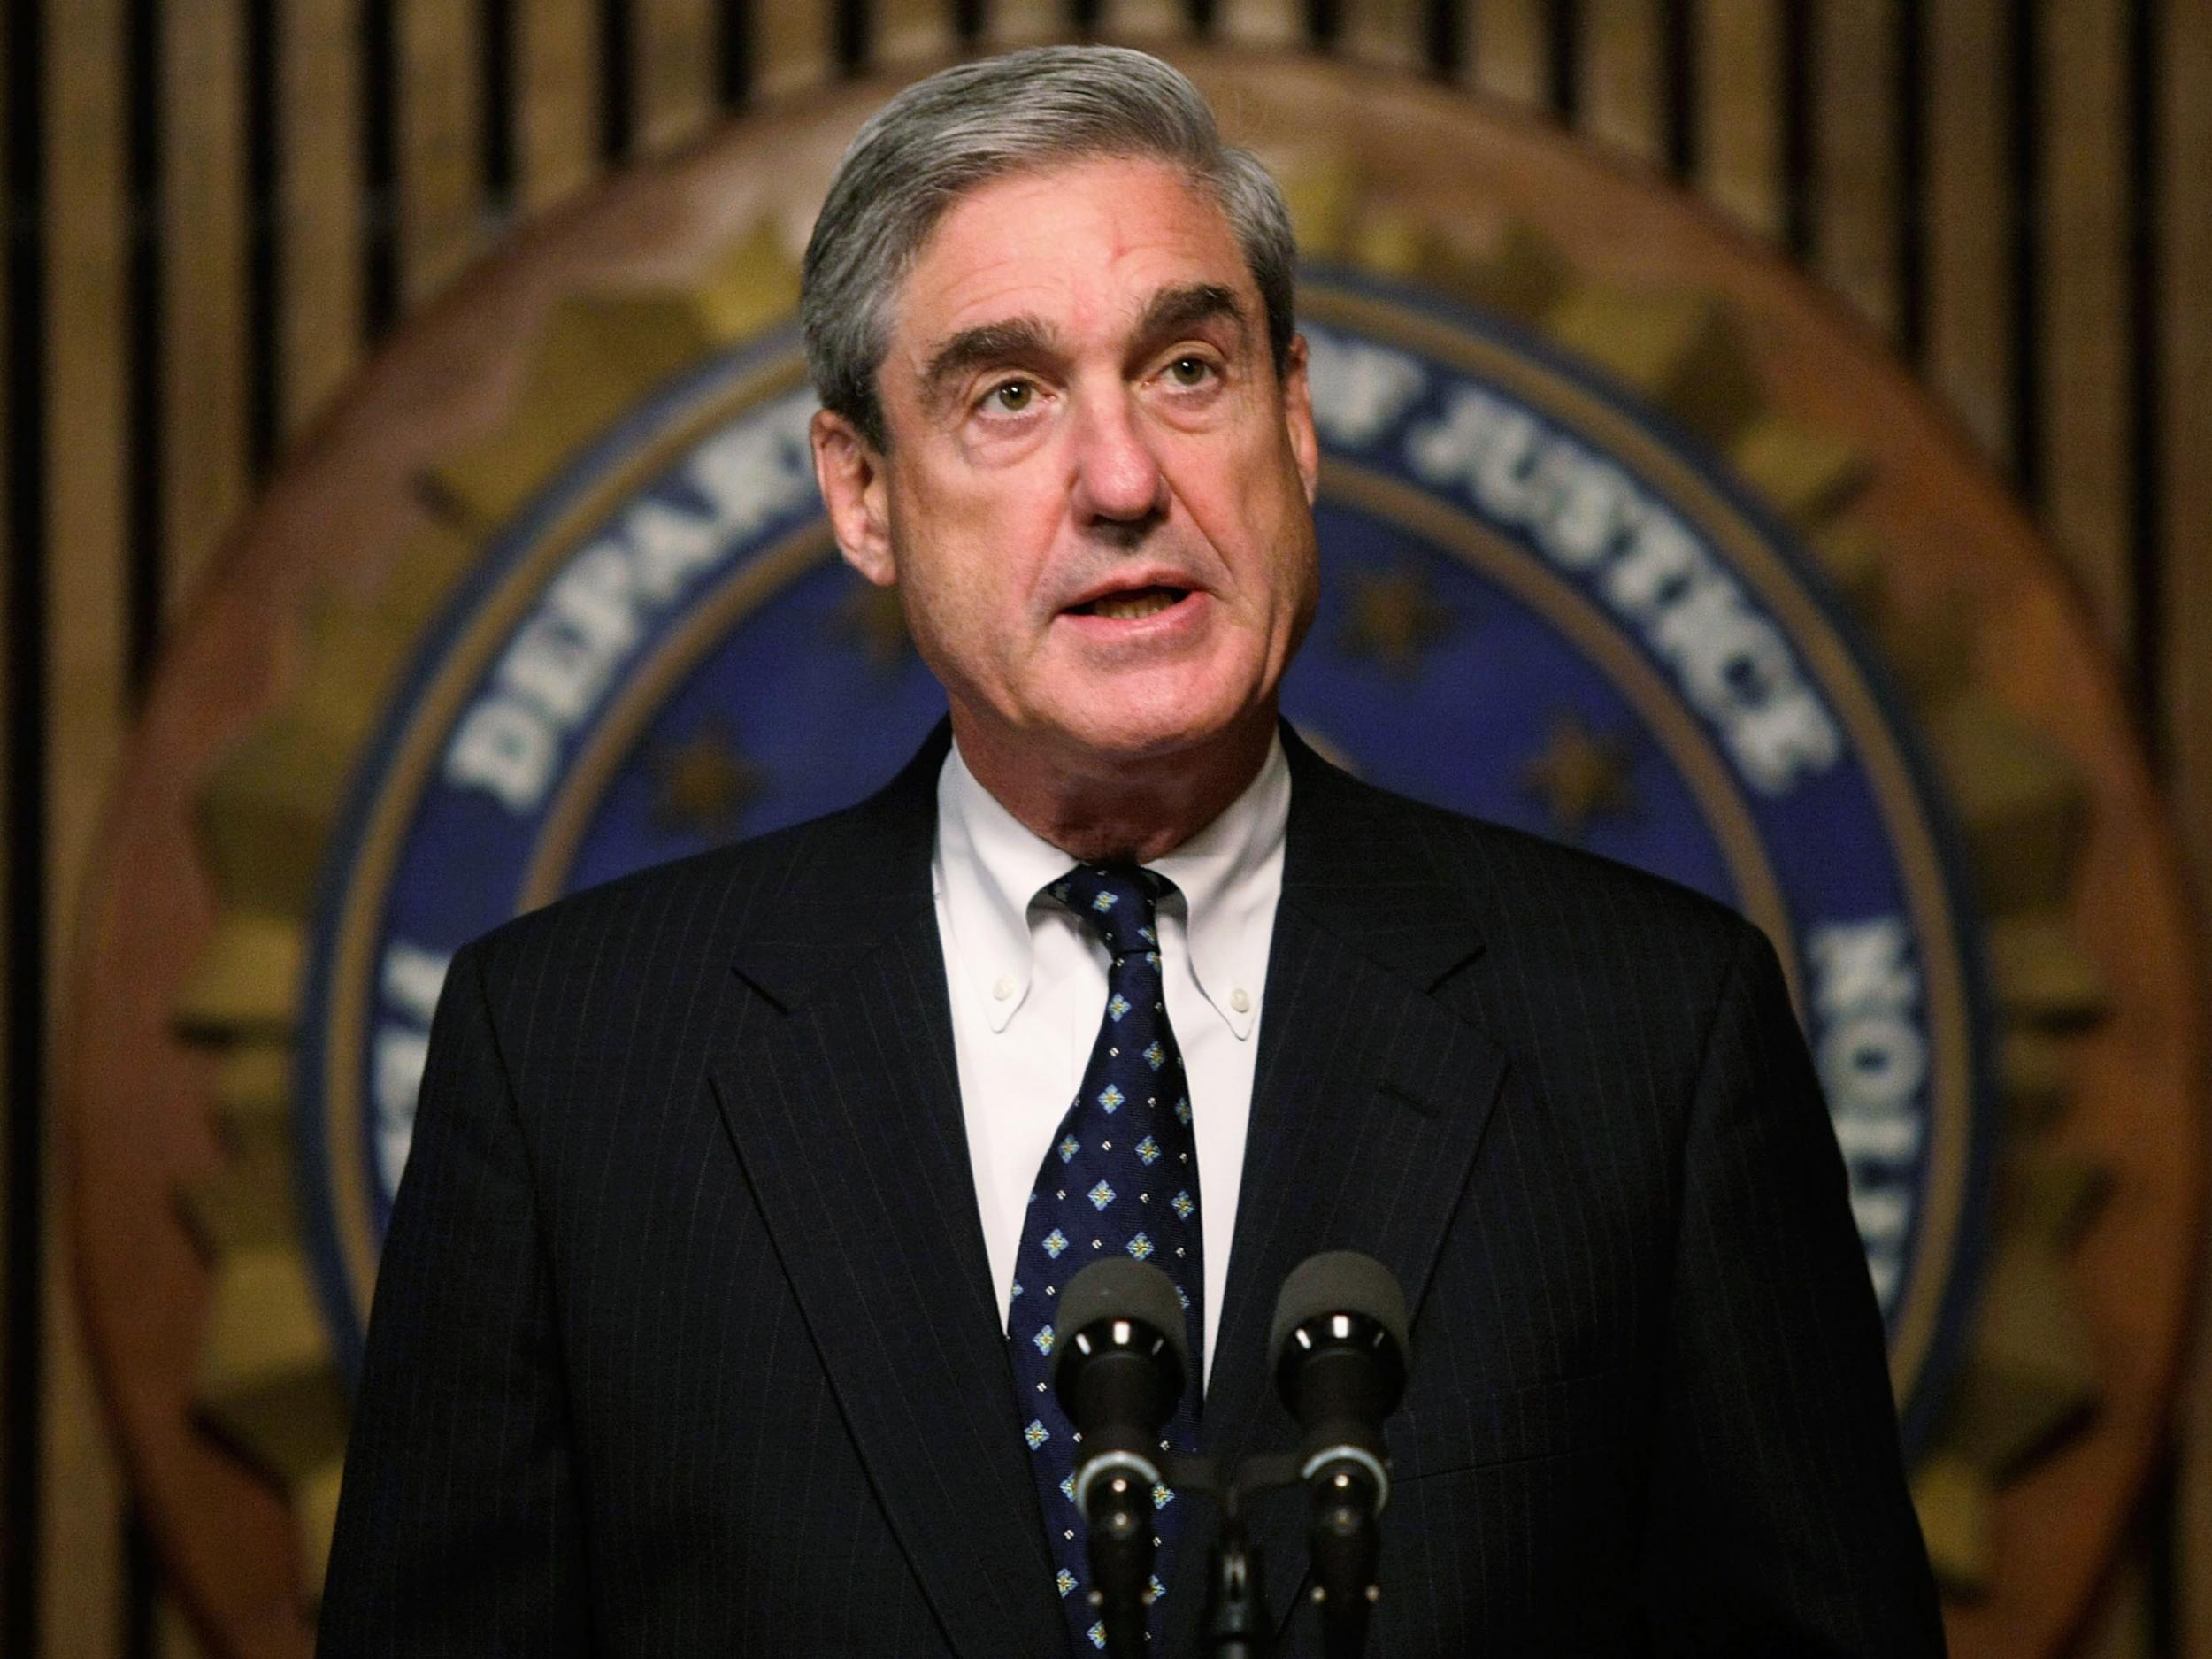 A number of people have been charged as part of Special Counsel Robert Mueller's Russia investigation